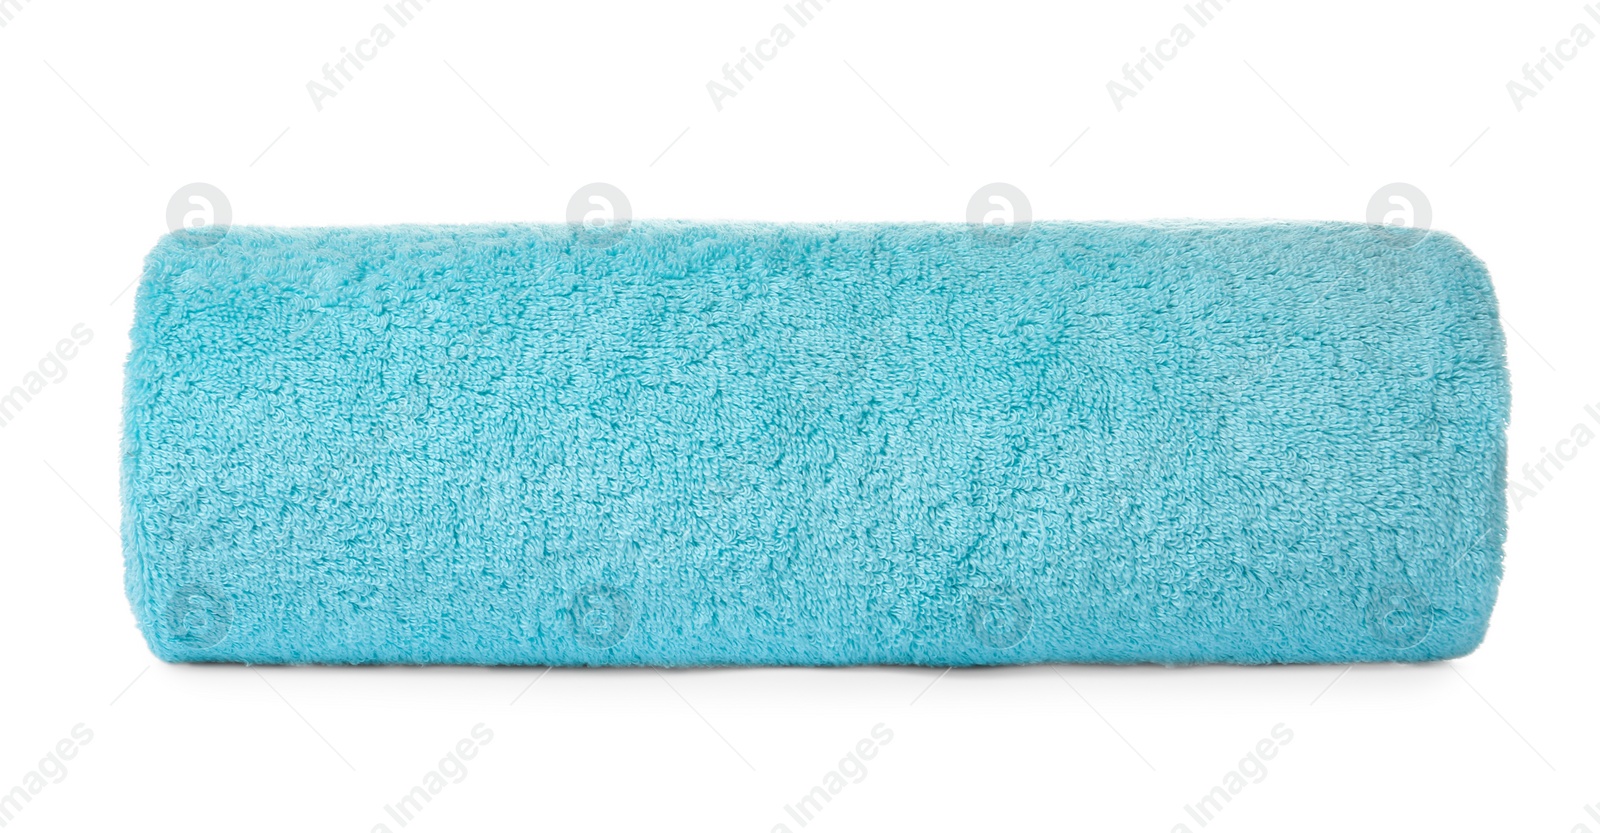 Photo of Rolled clean turquoise towel on white background